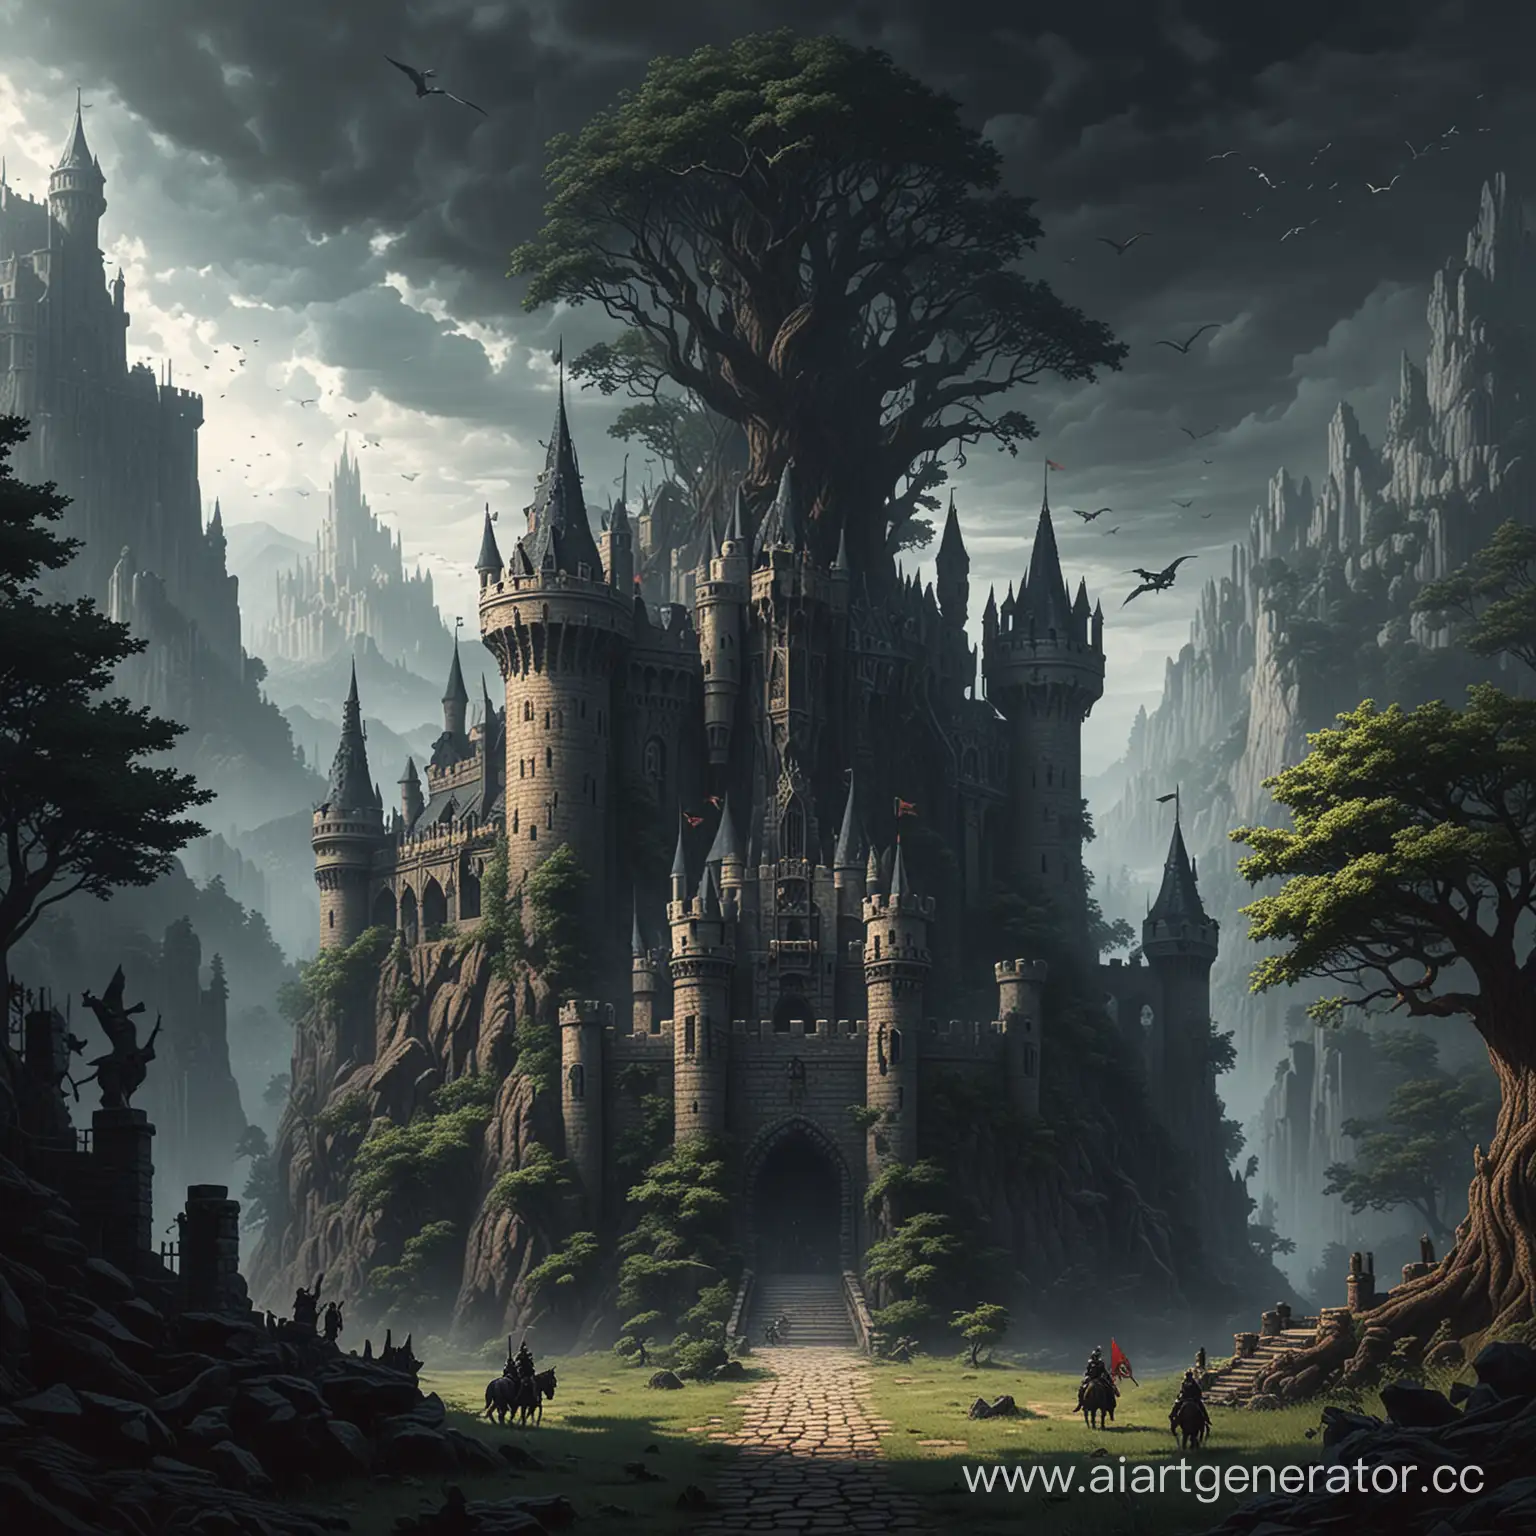 Dark-Fantasy-Pixel-Art-Castle-Dragons-and-Knights-in-Enchanted-Forest